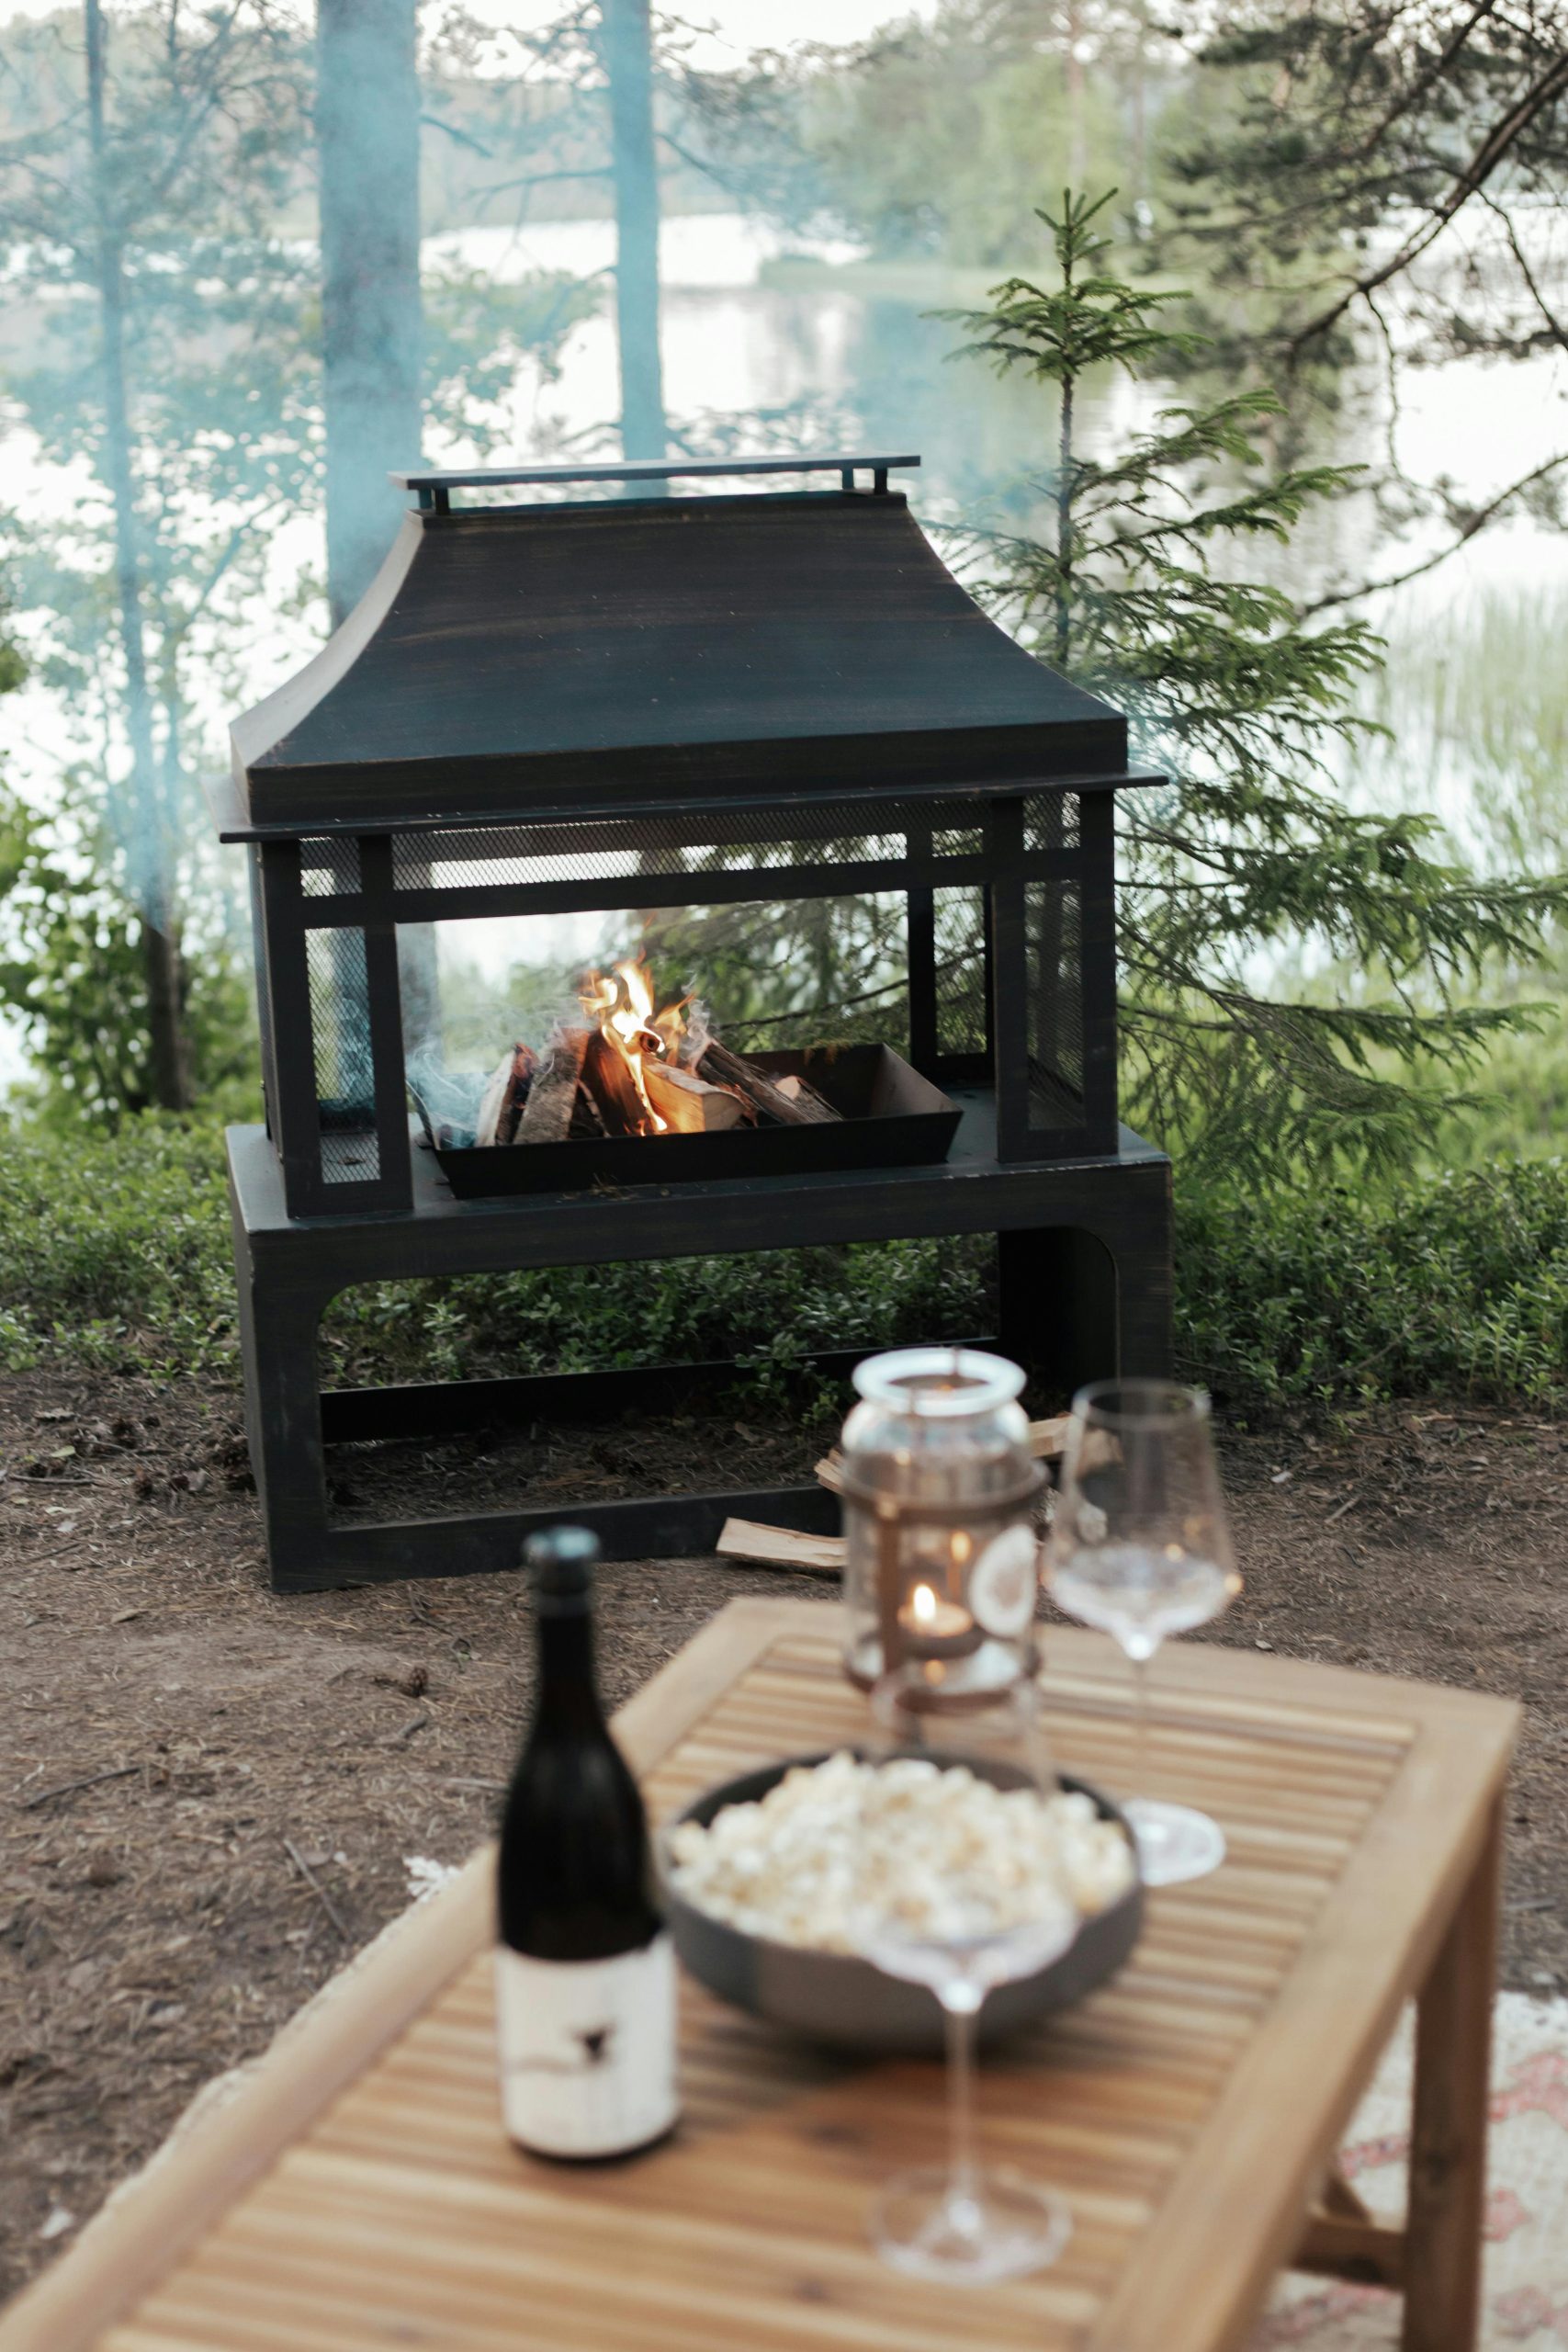 Planning Your Outdoor Fireplace